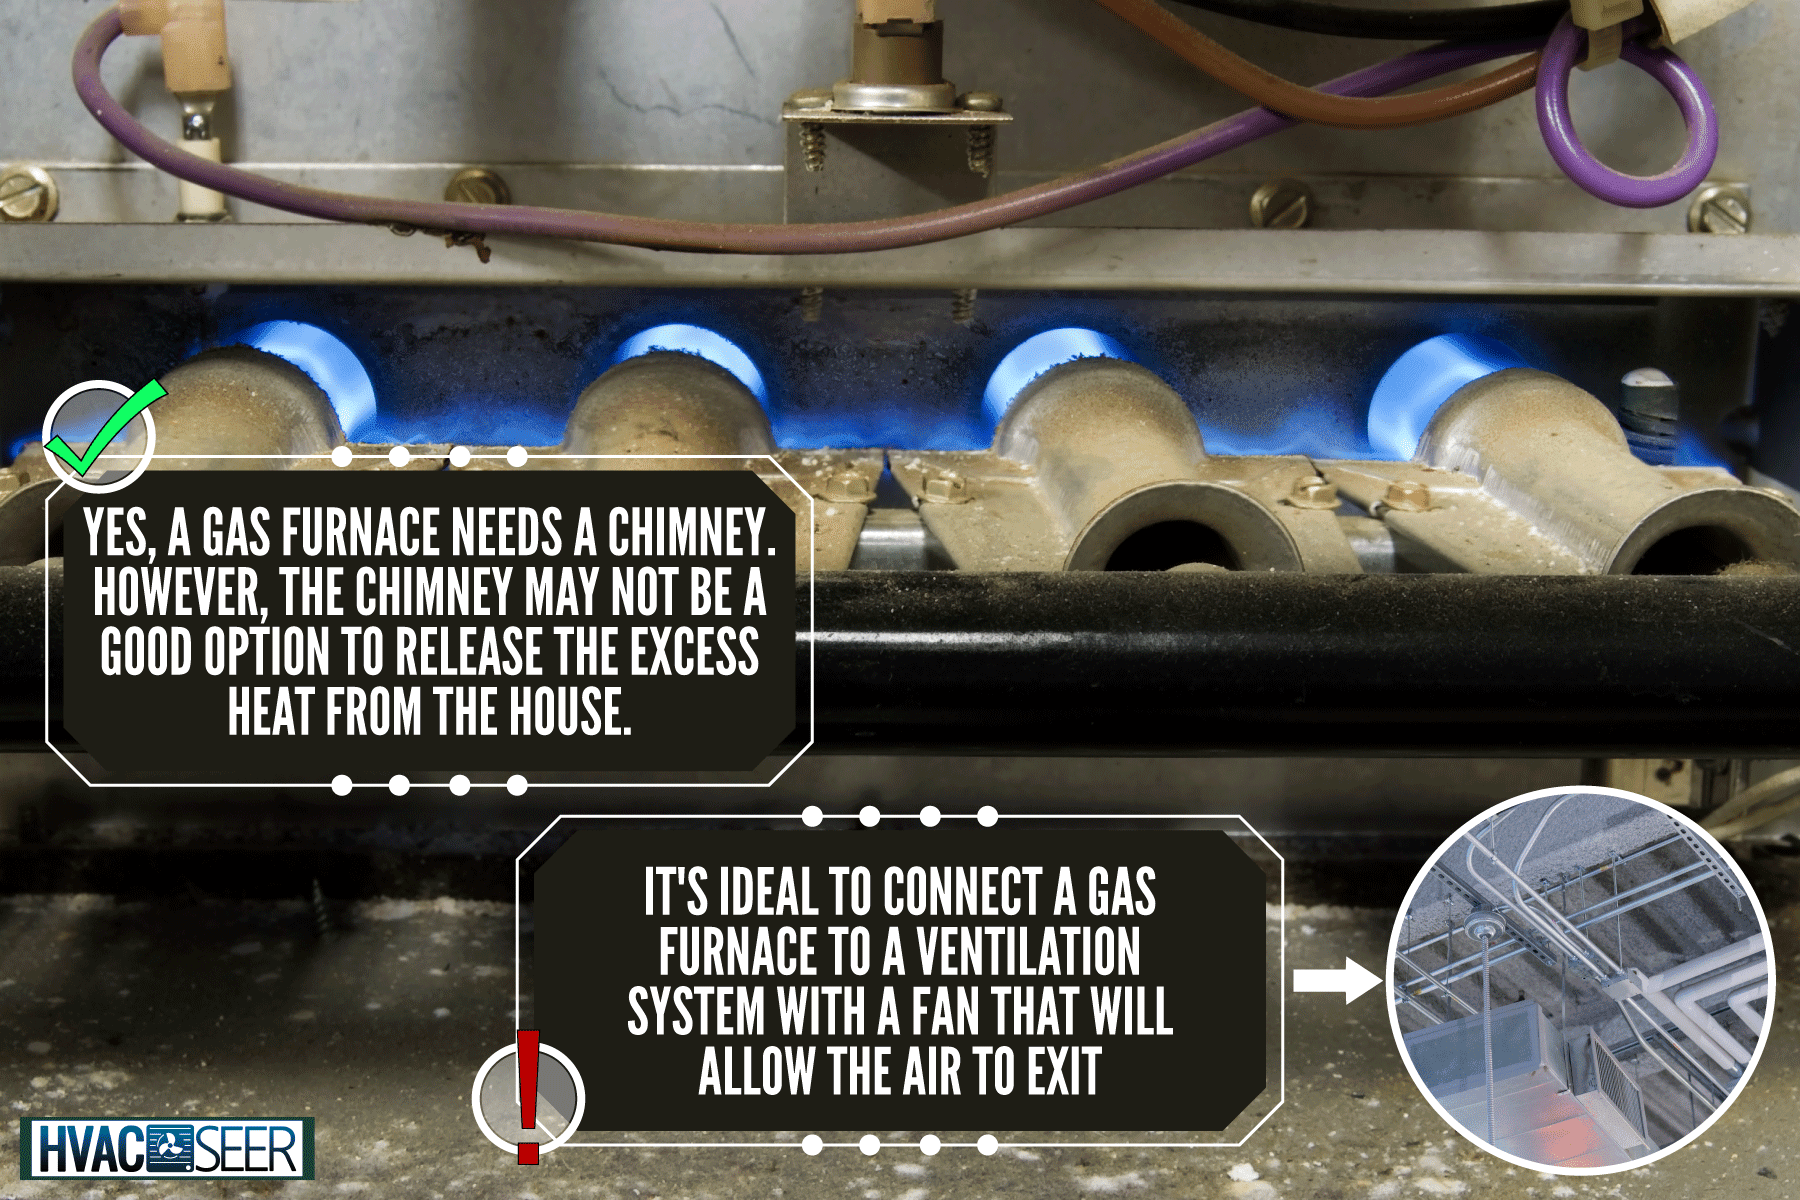 A gas furnace, Does A Gas Furnace Need A Chimney?